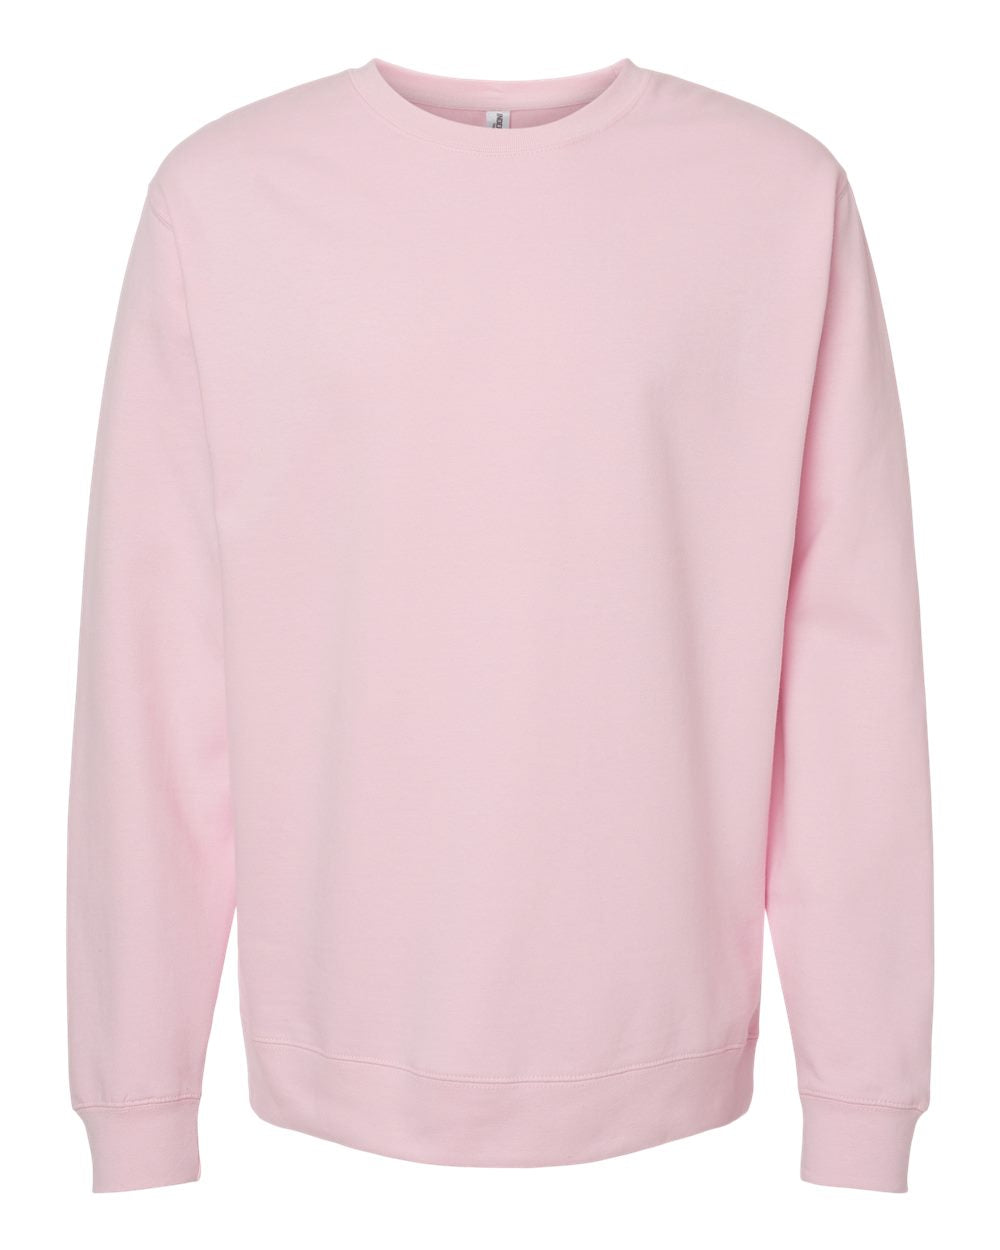 Independent Trading Co. Midweight Sweatshirt SS3000 #color_Light Pink